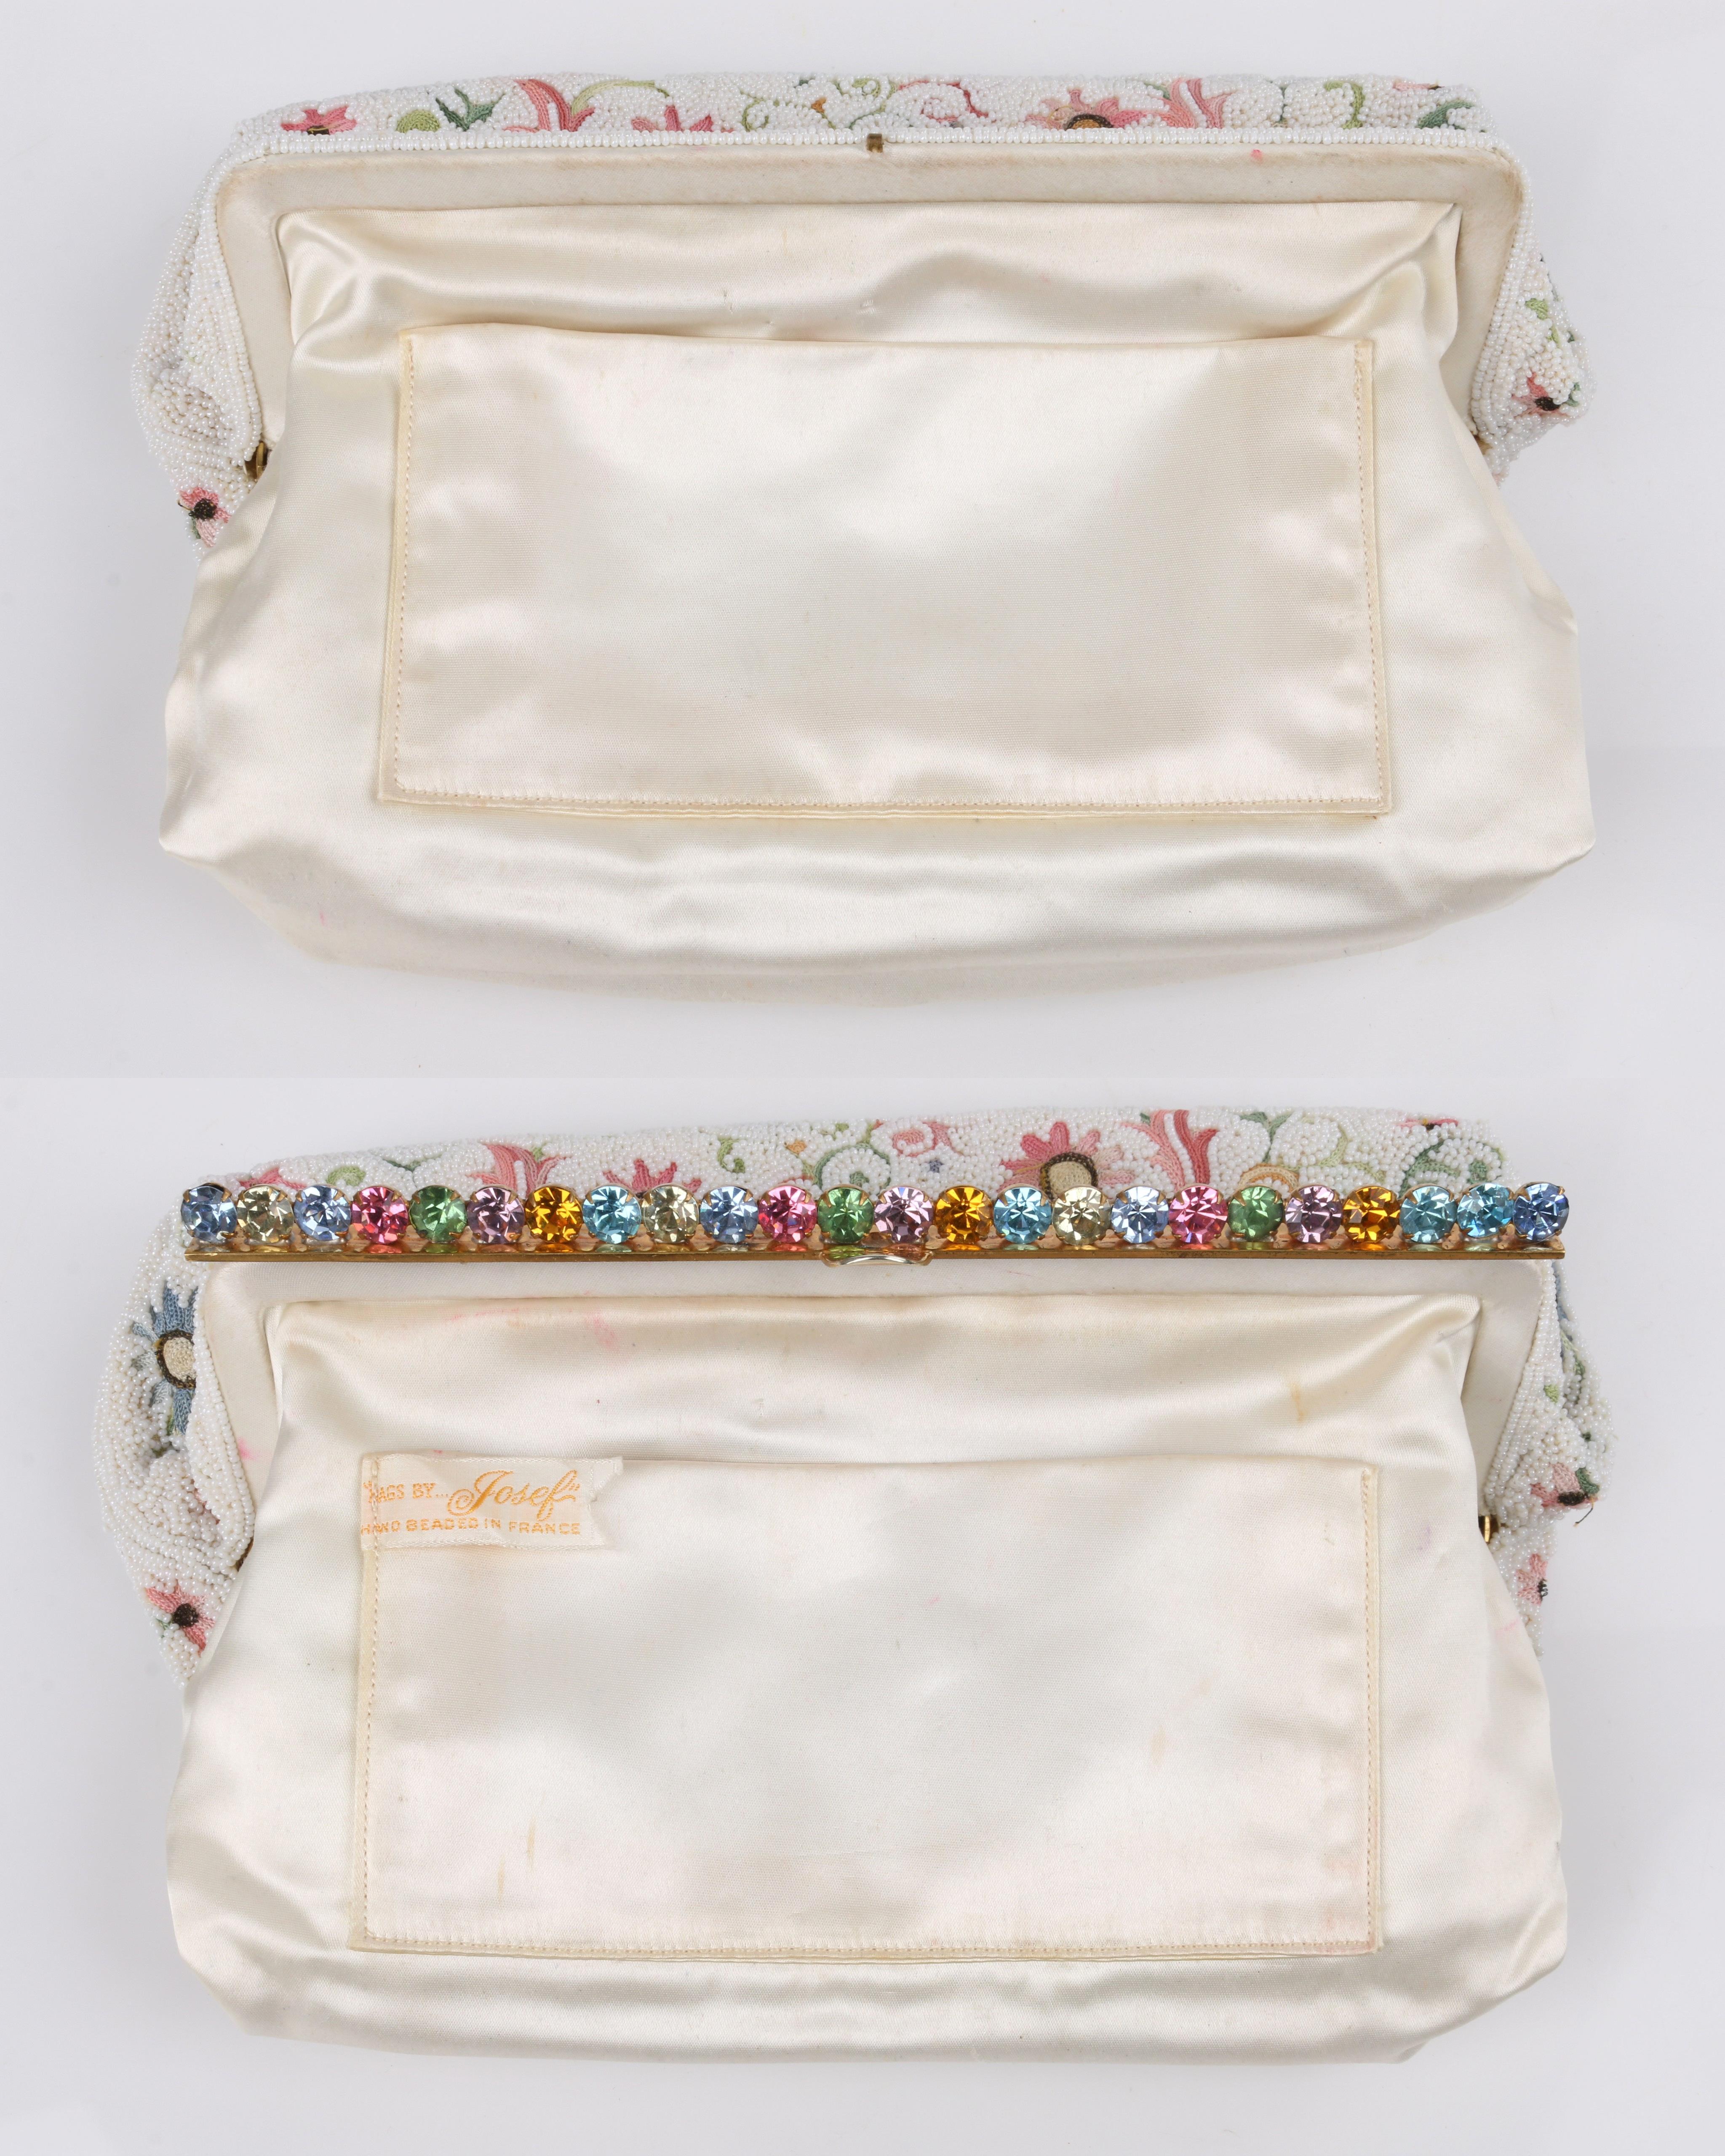 Beige BAGS BY JOSEF c.1940's Floral Point De Beauvais Glass Beaded Frame Top Clutch